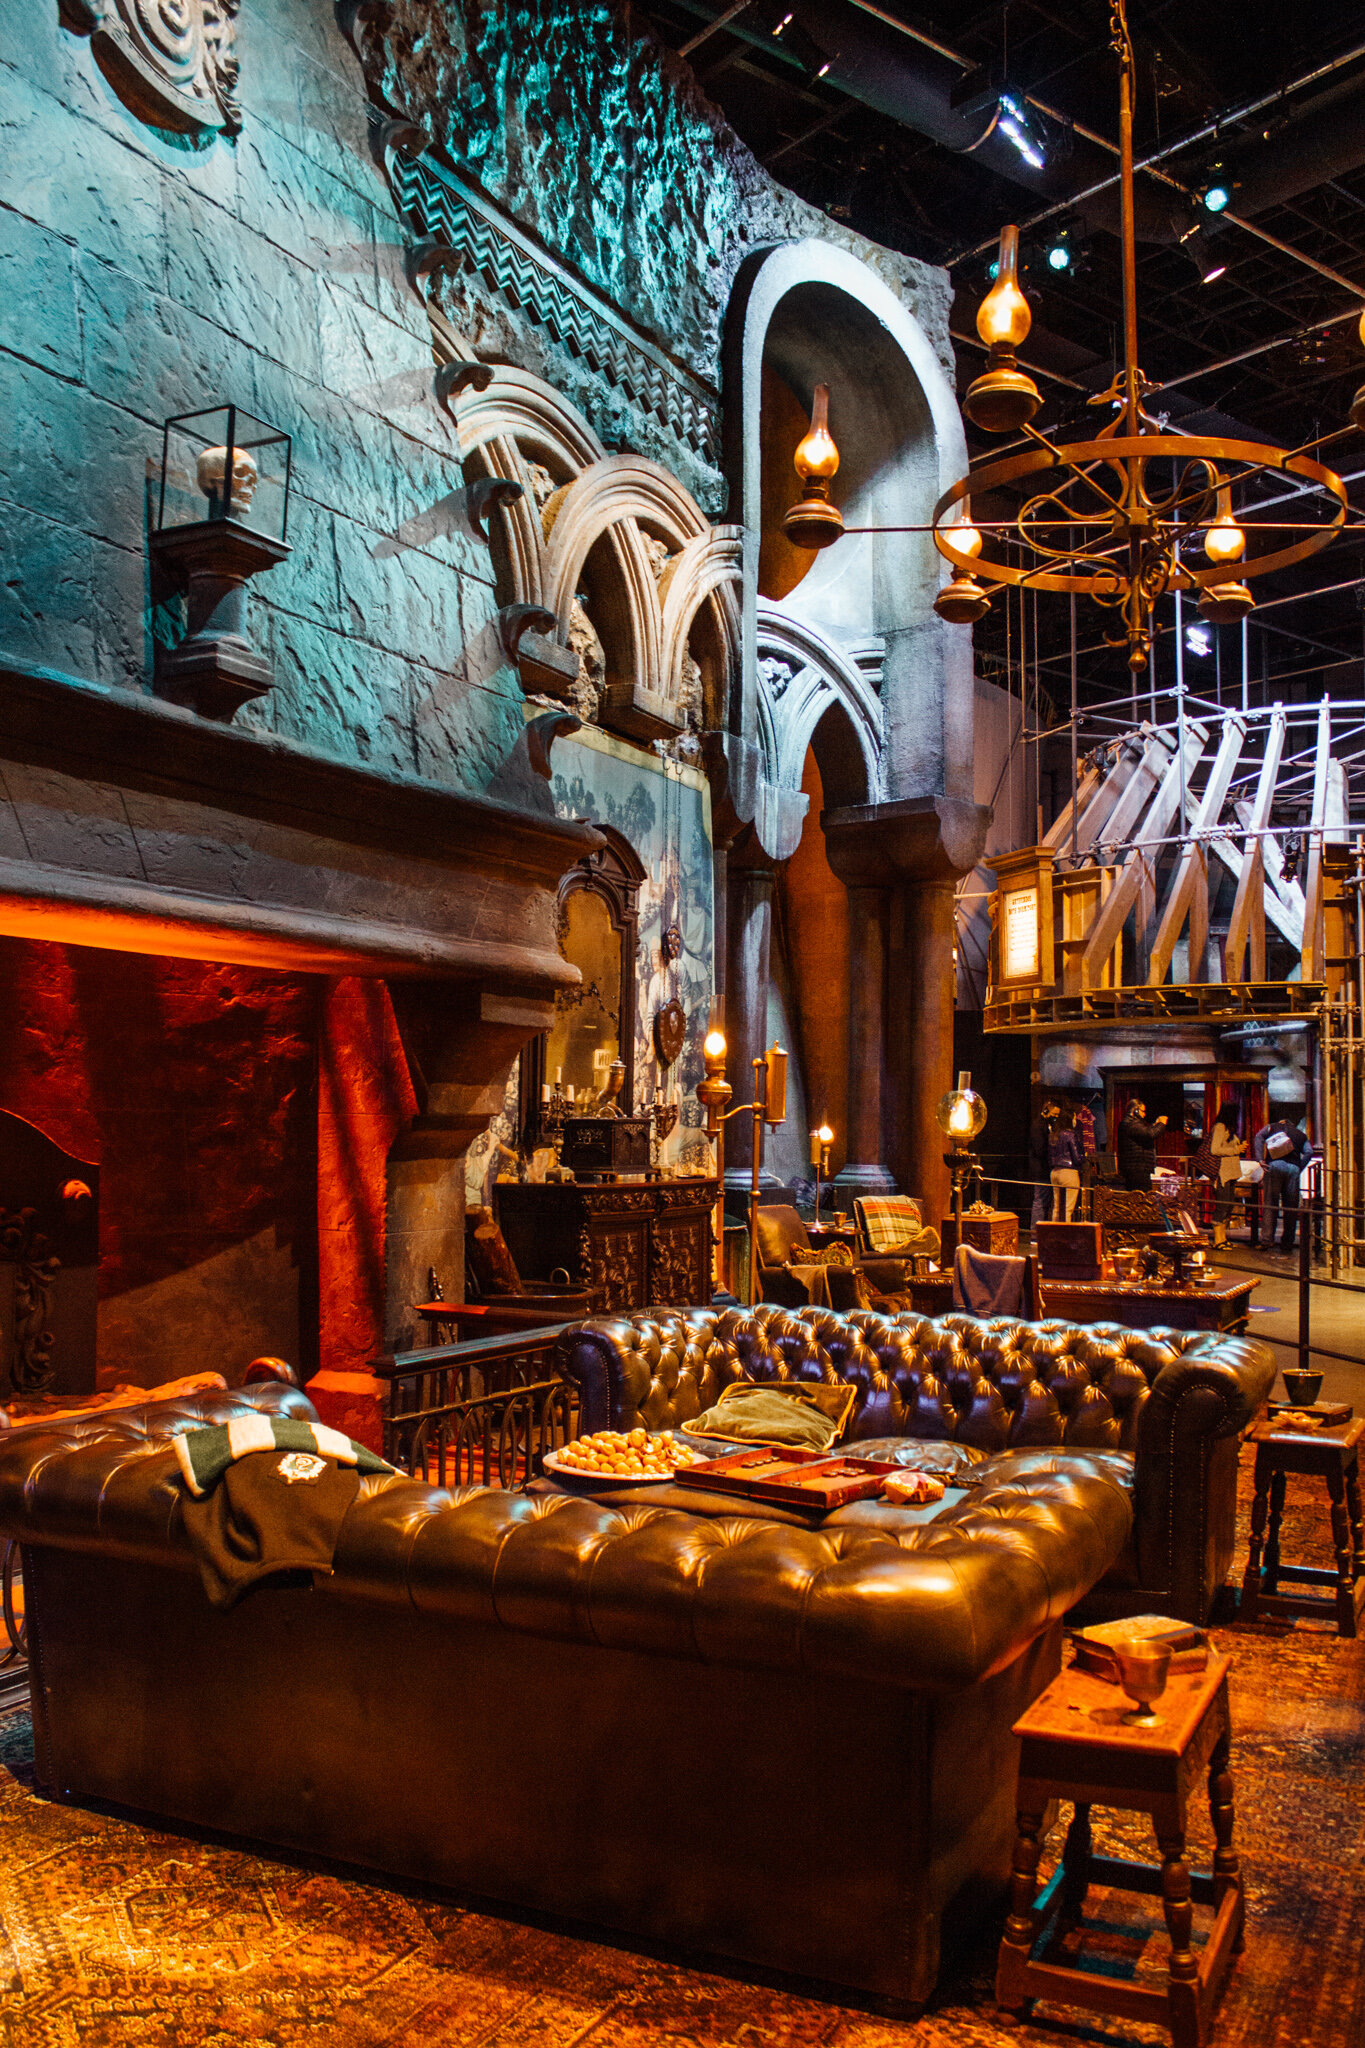 Hogwarts Common Room at Harry Potter Studios in the UK